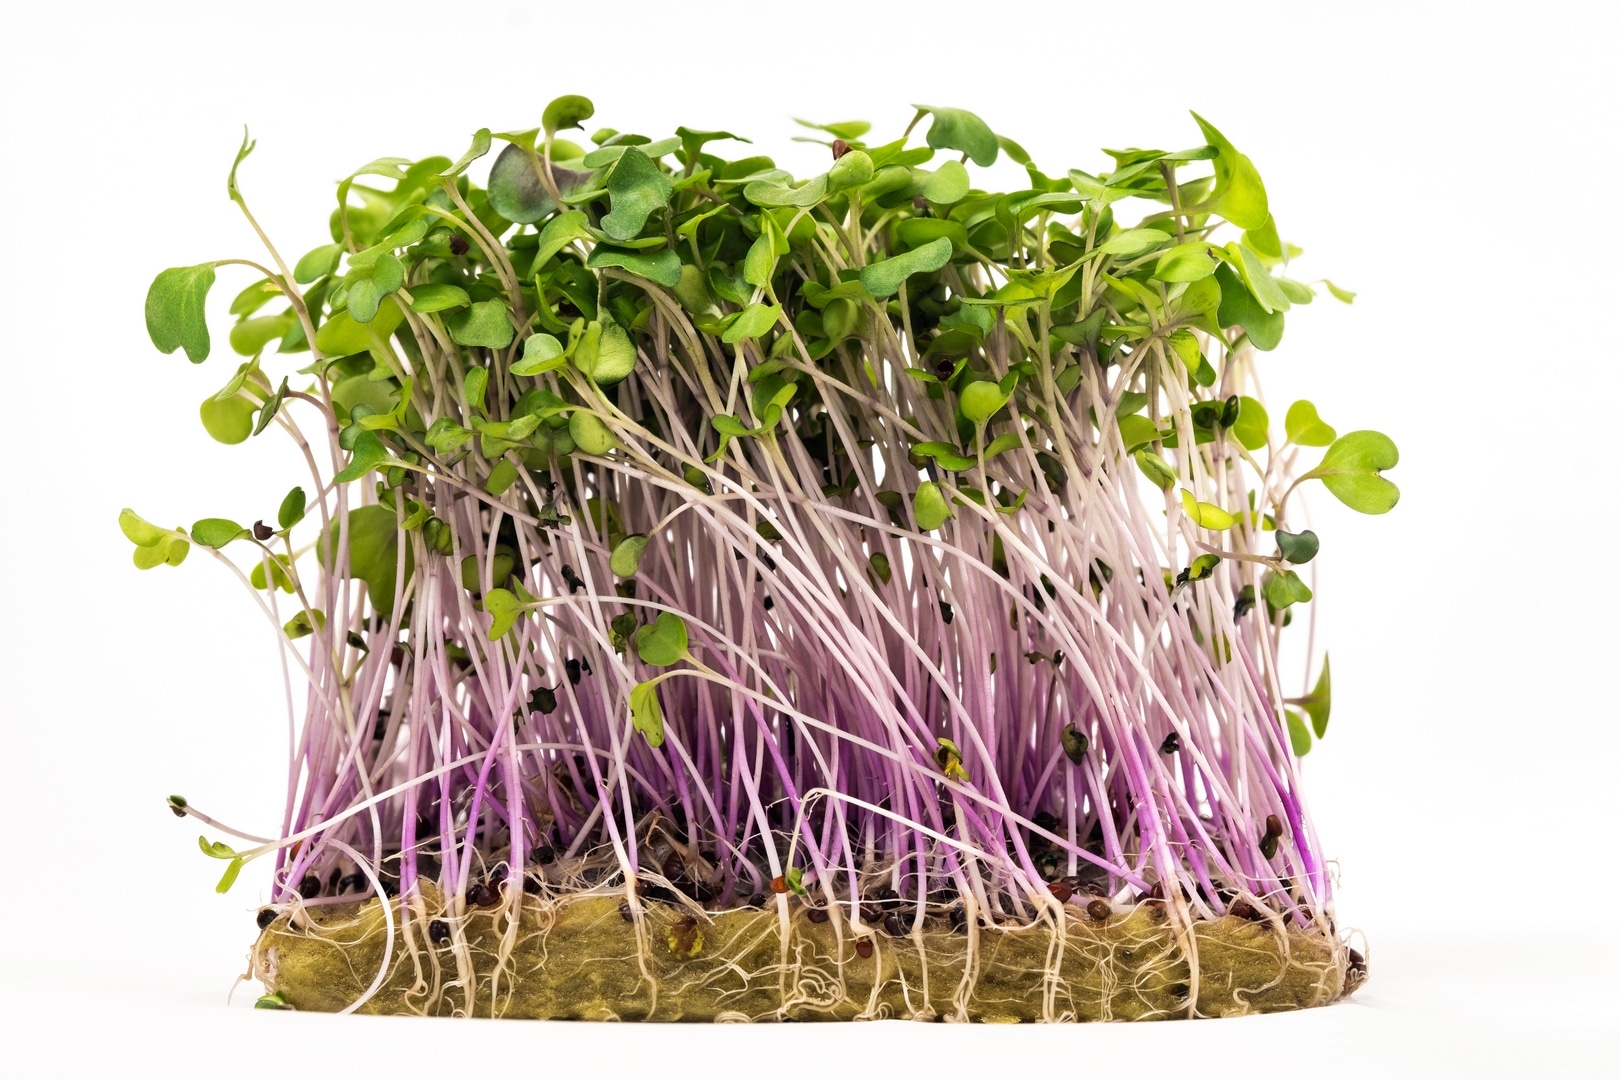 micro green seed seedlings on white isolated background 1 Copiar